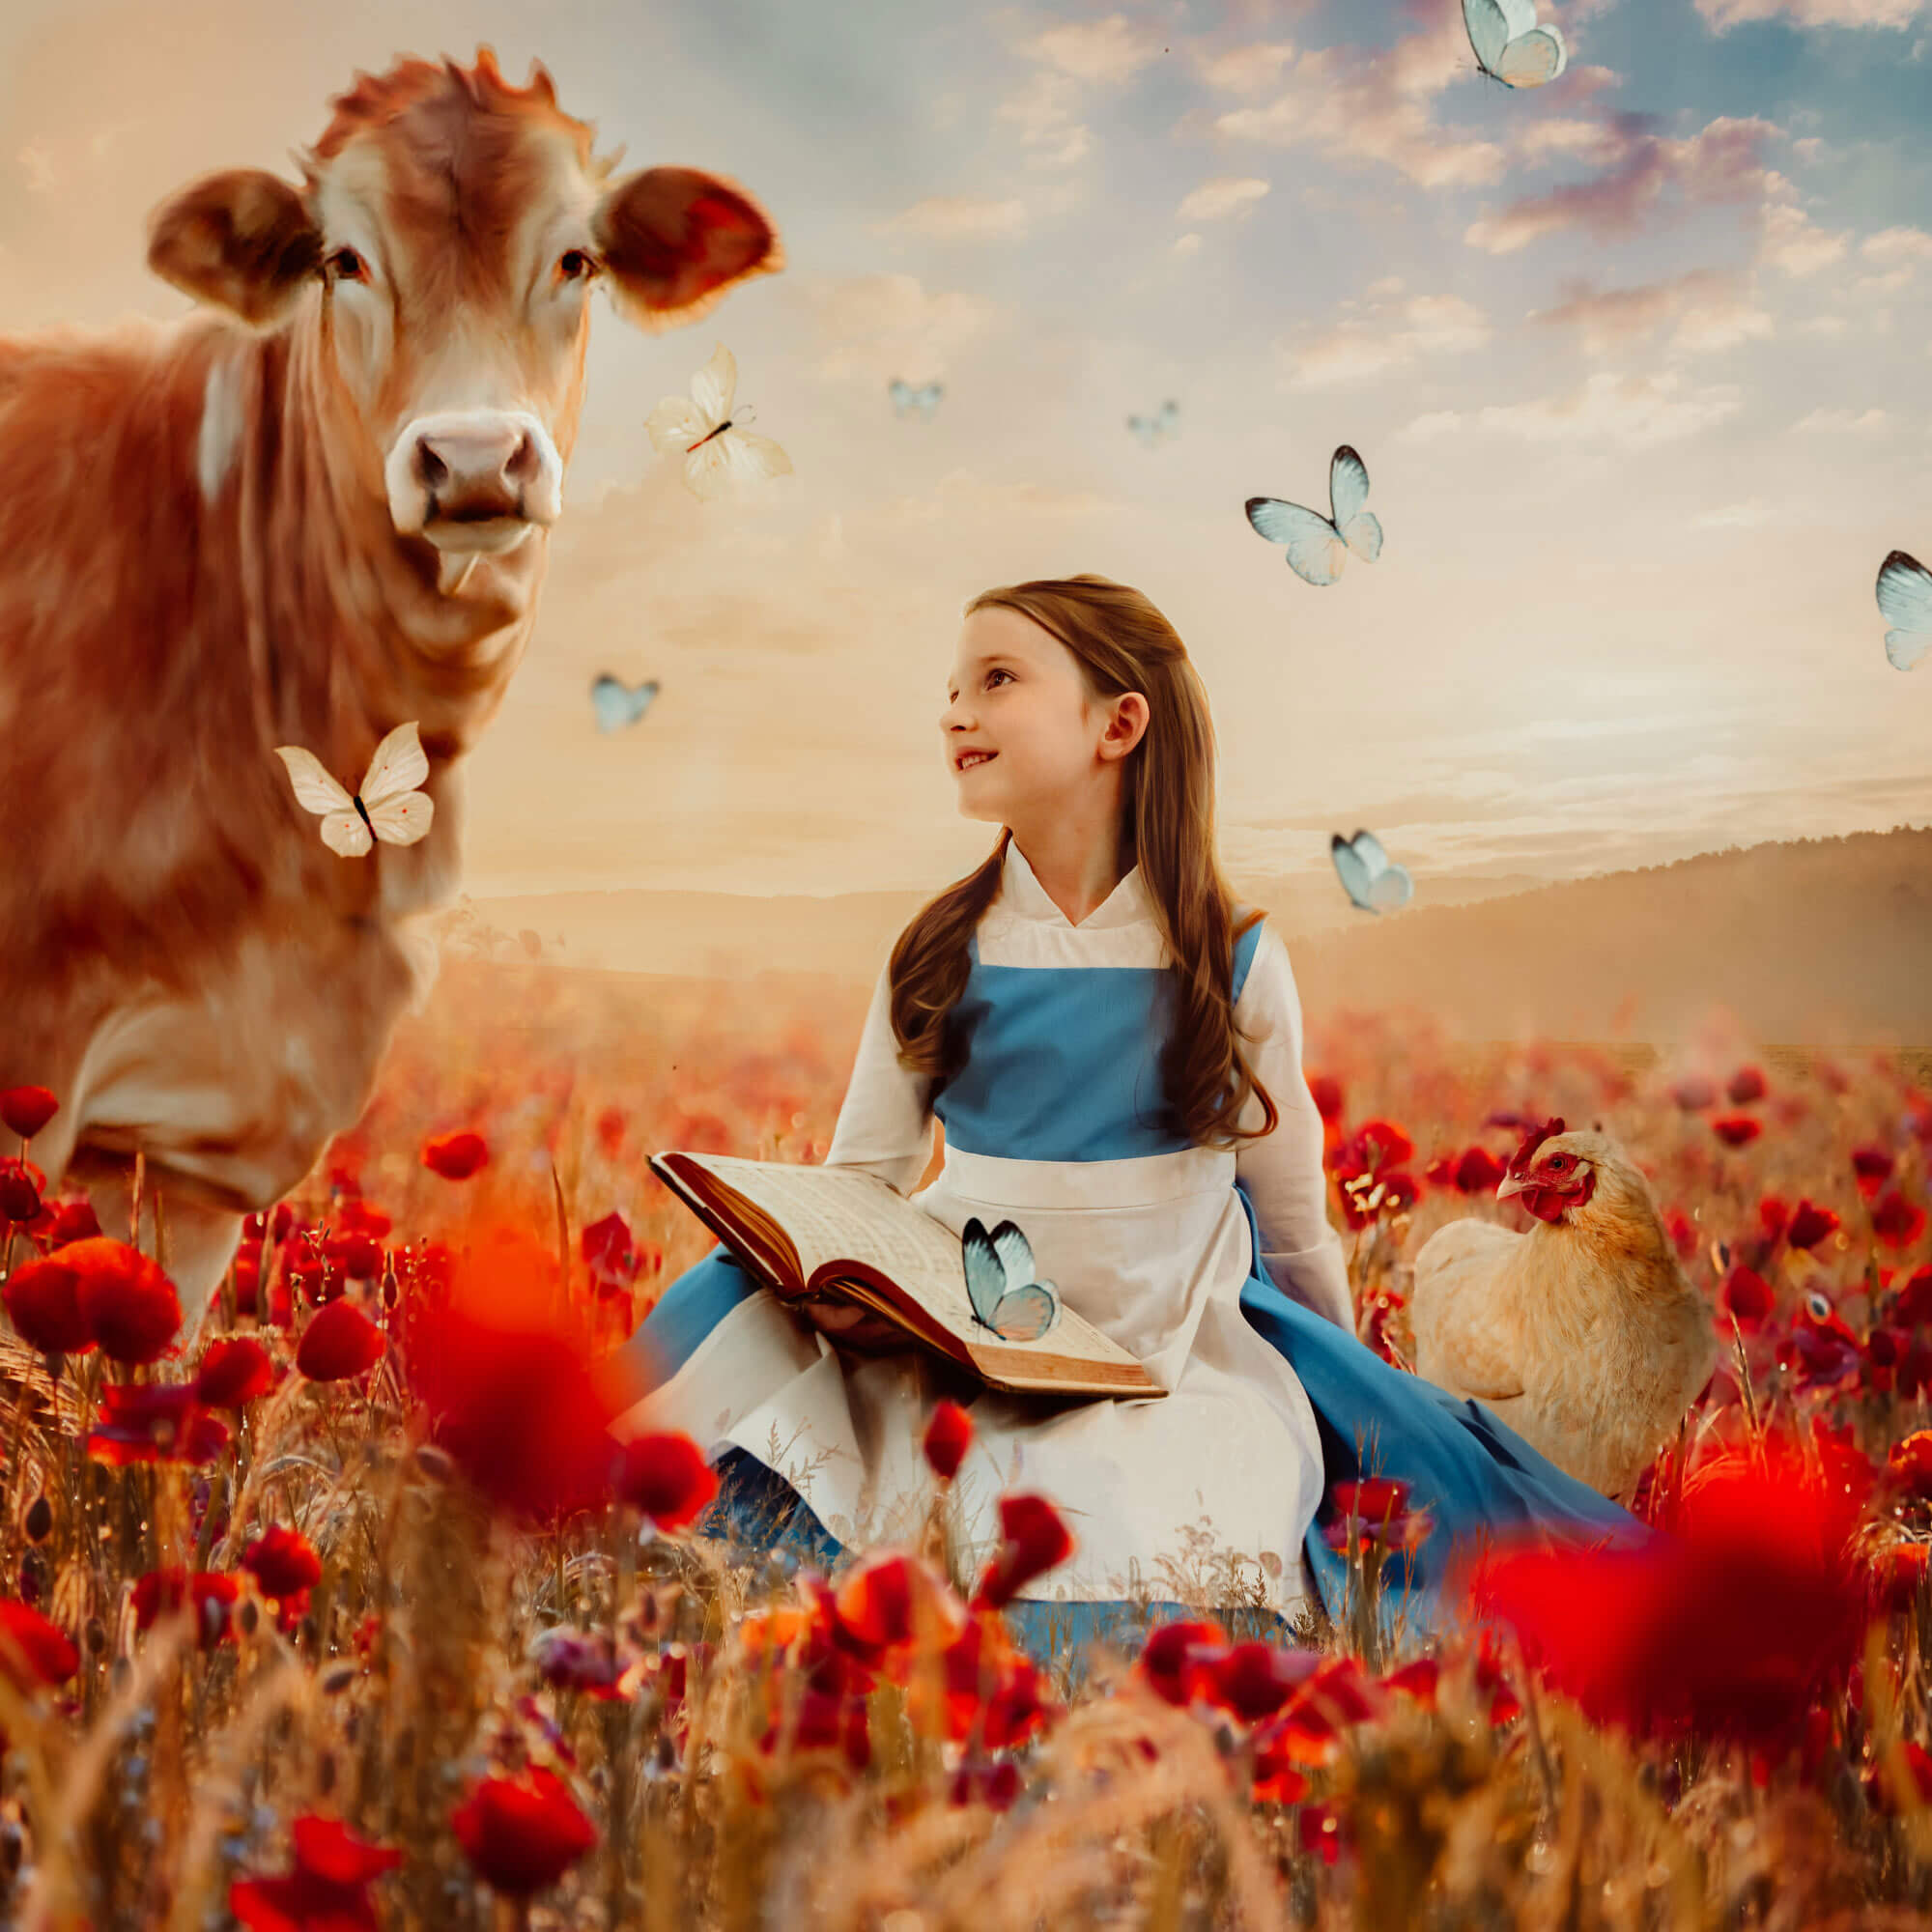 wichita portrait artist image of a young girl dressed as Belle in a field of red flowers